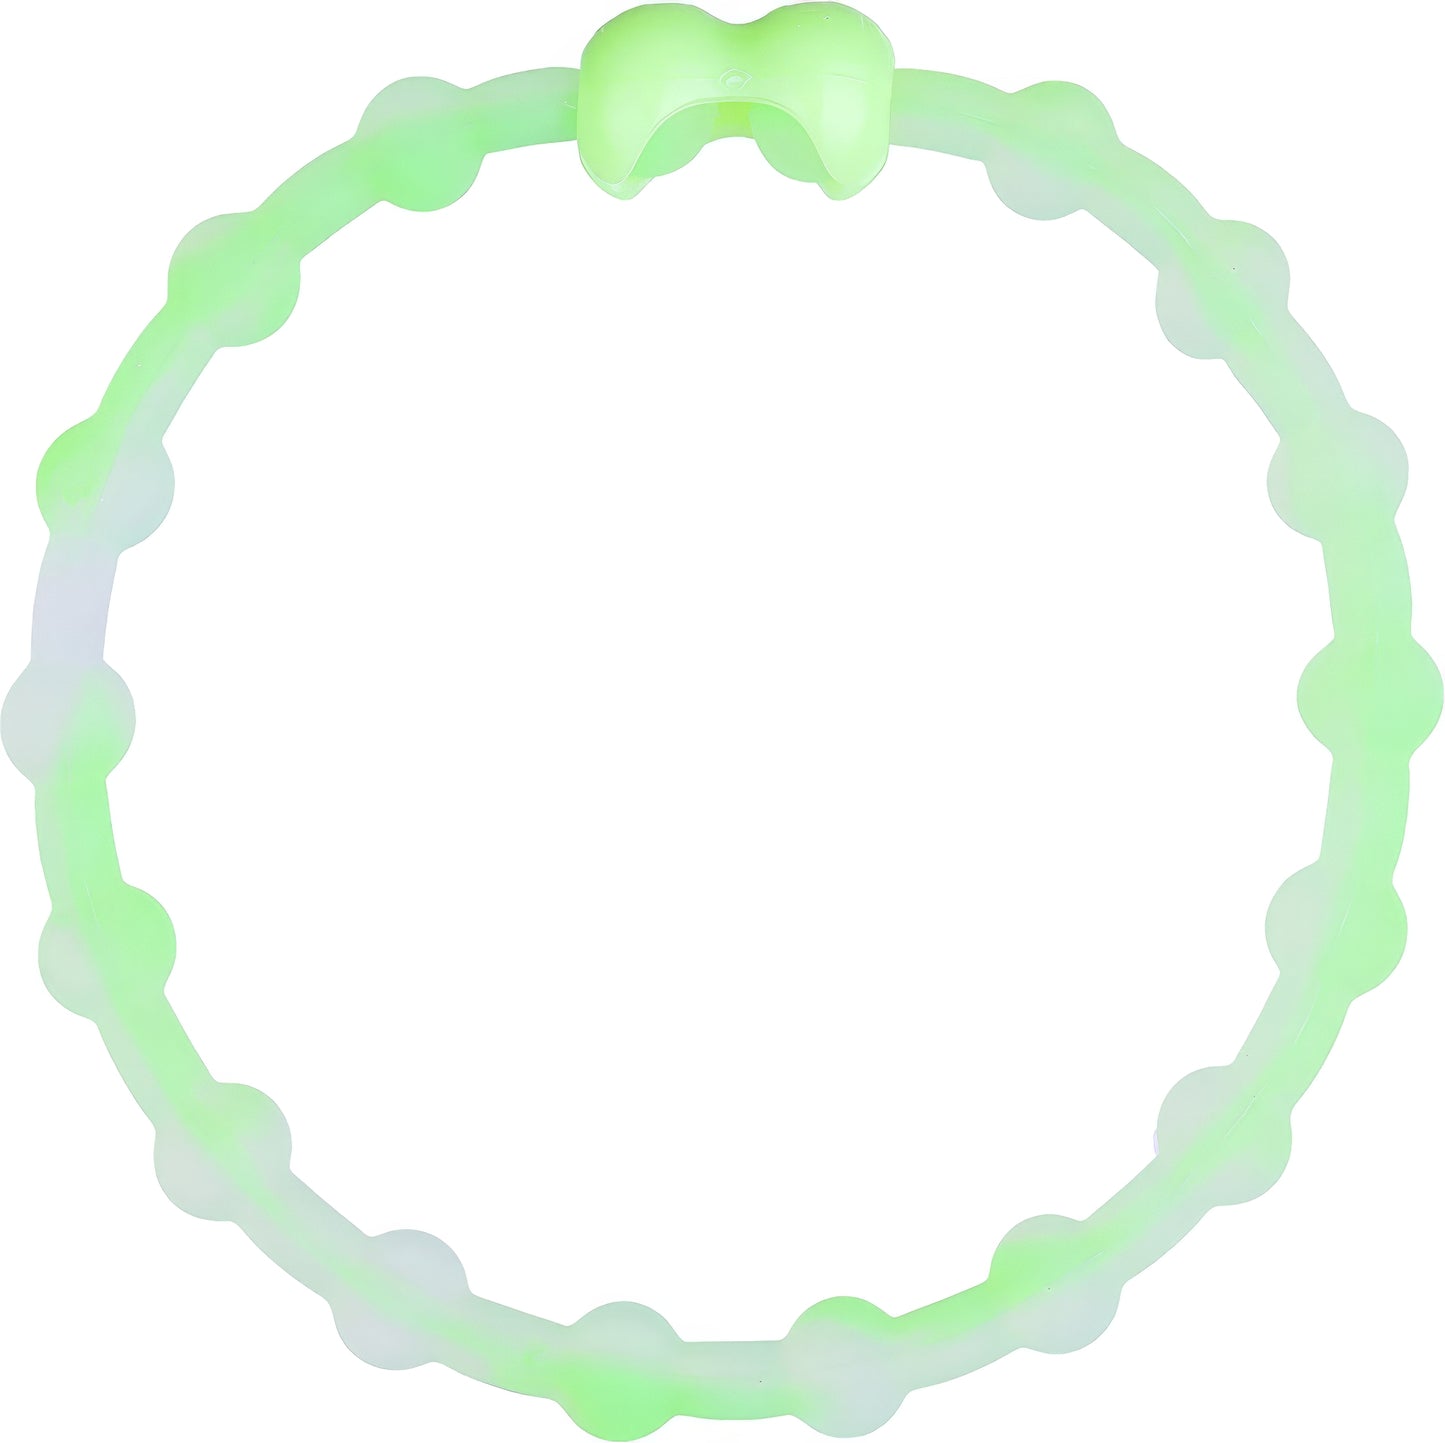 Clear Neon Green Hair Ties (8 Pack) - Shine Bright with Every Style